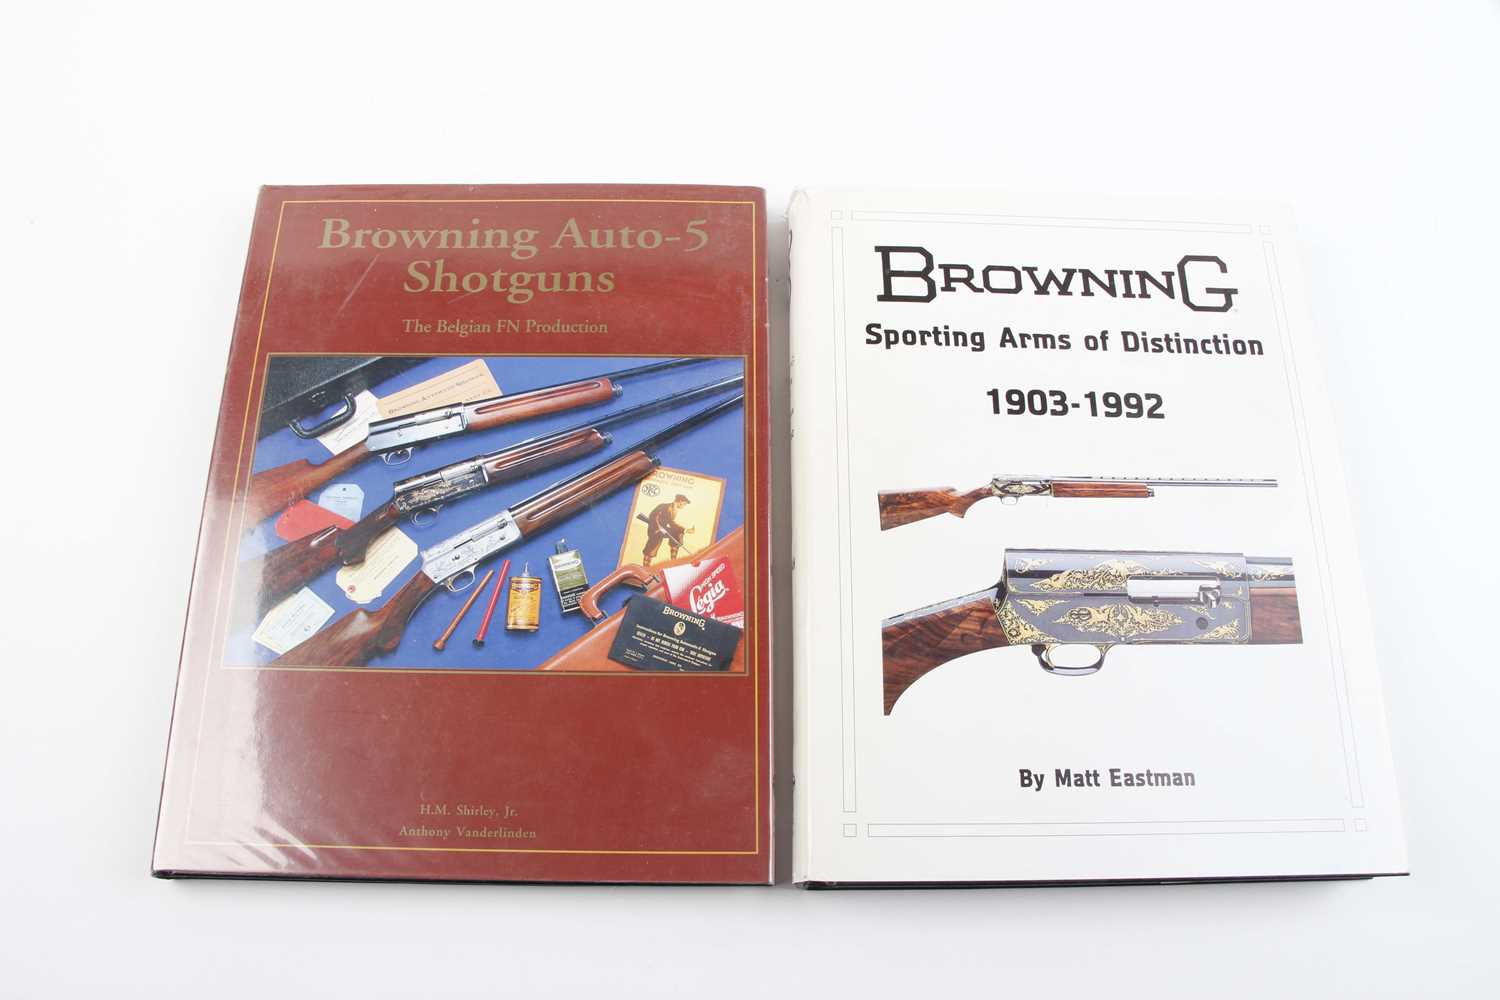 2 Vols: Browning Sporting Arms of Distinction by Matt Eastman; Browning Auto-5 Shotguns The